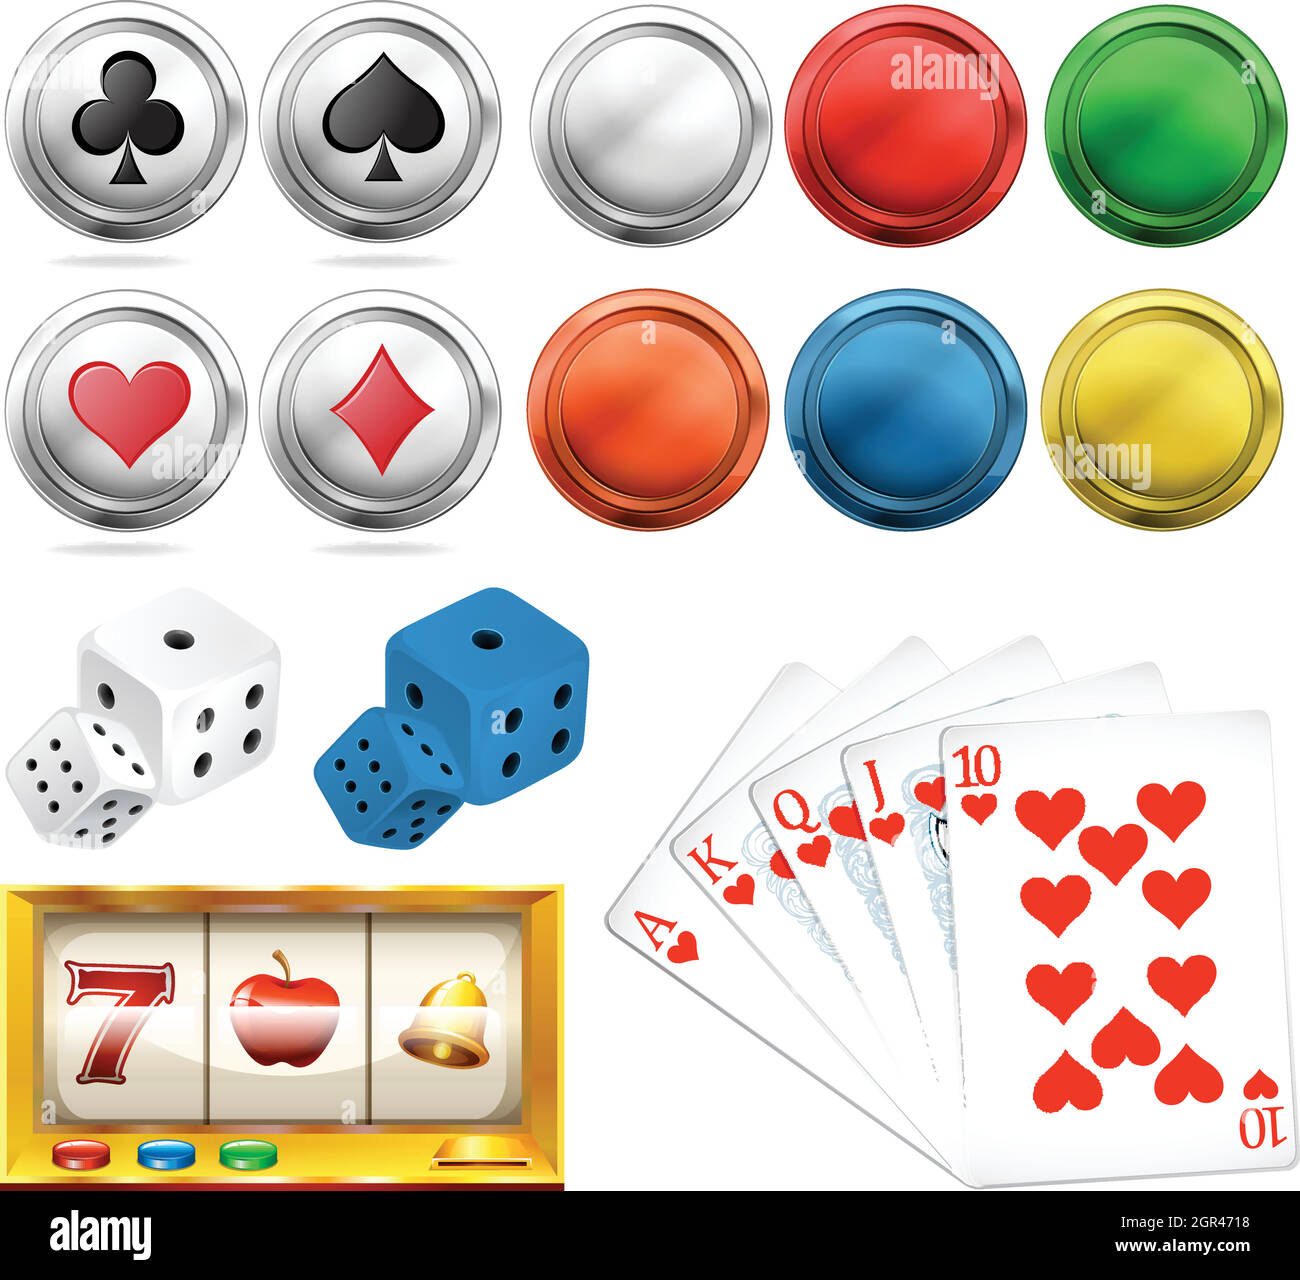 Casino set with tokens and cards Stock Vector